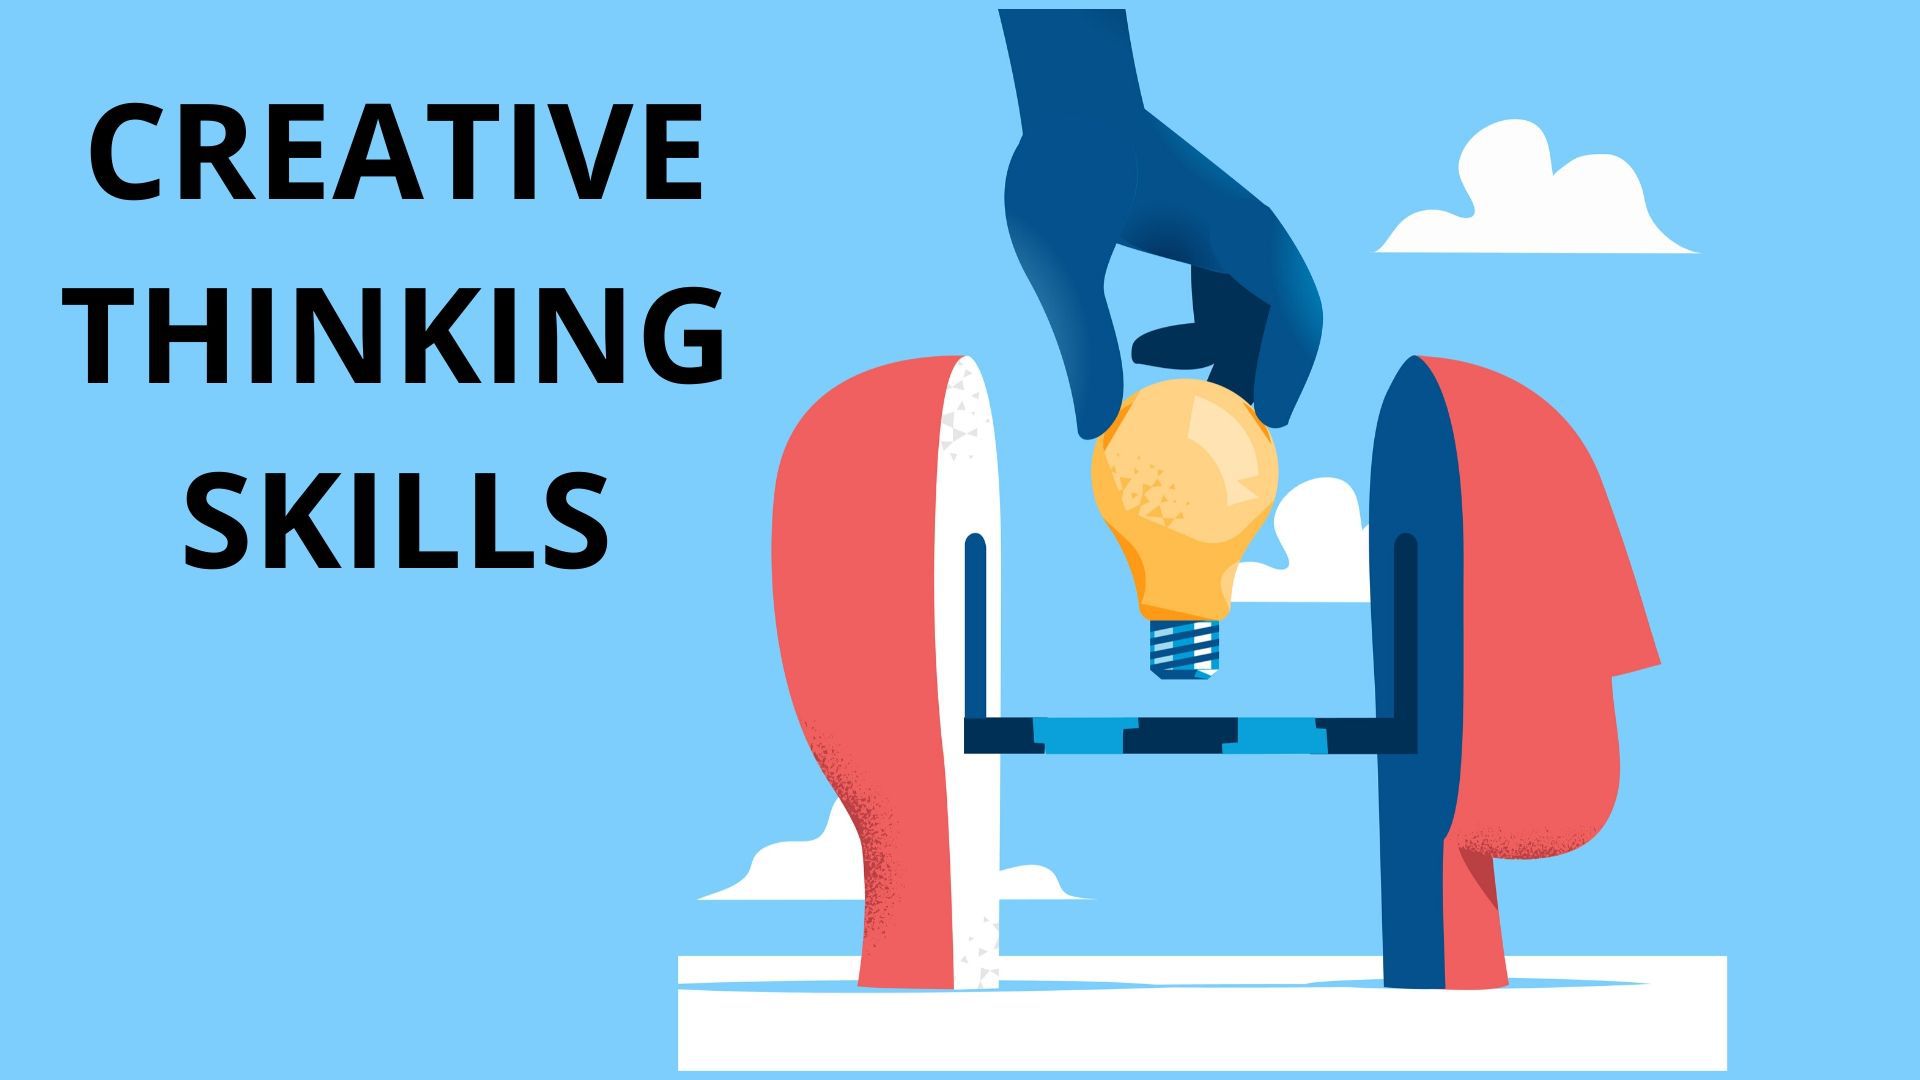 Top 10 Creative Thinking Skills to Succeed | Marketing91